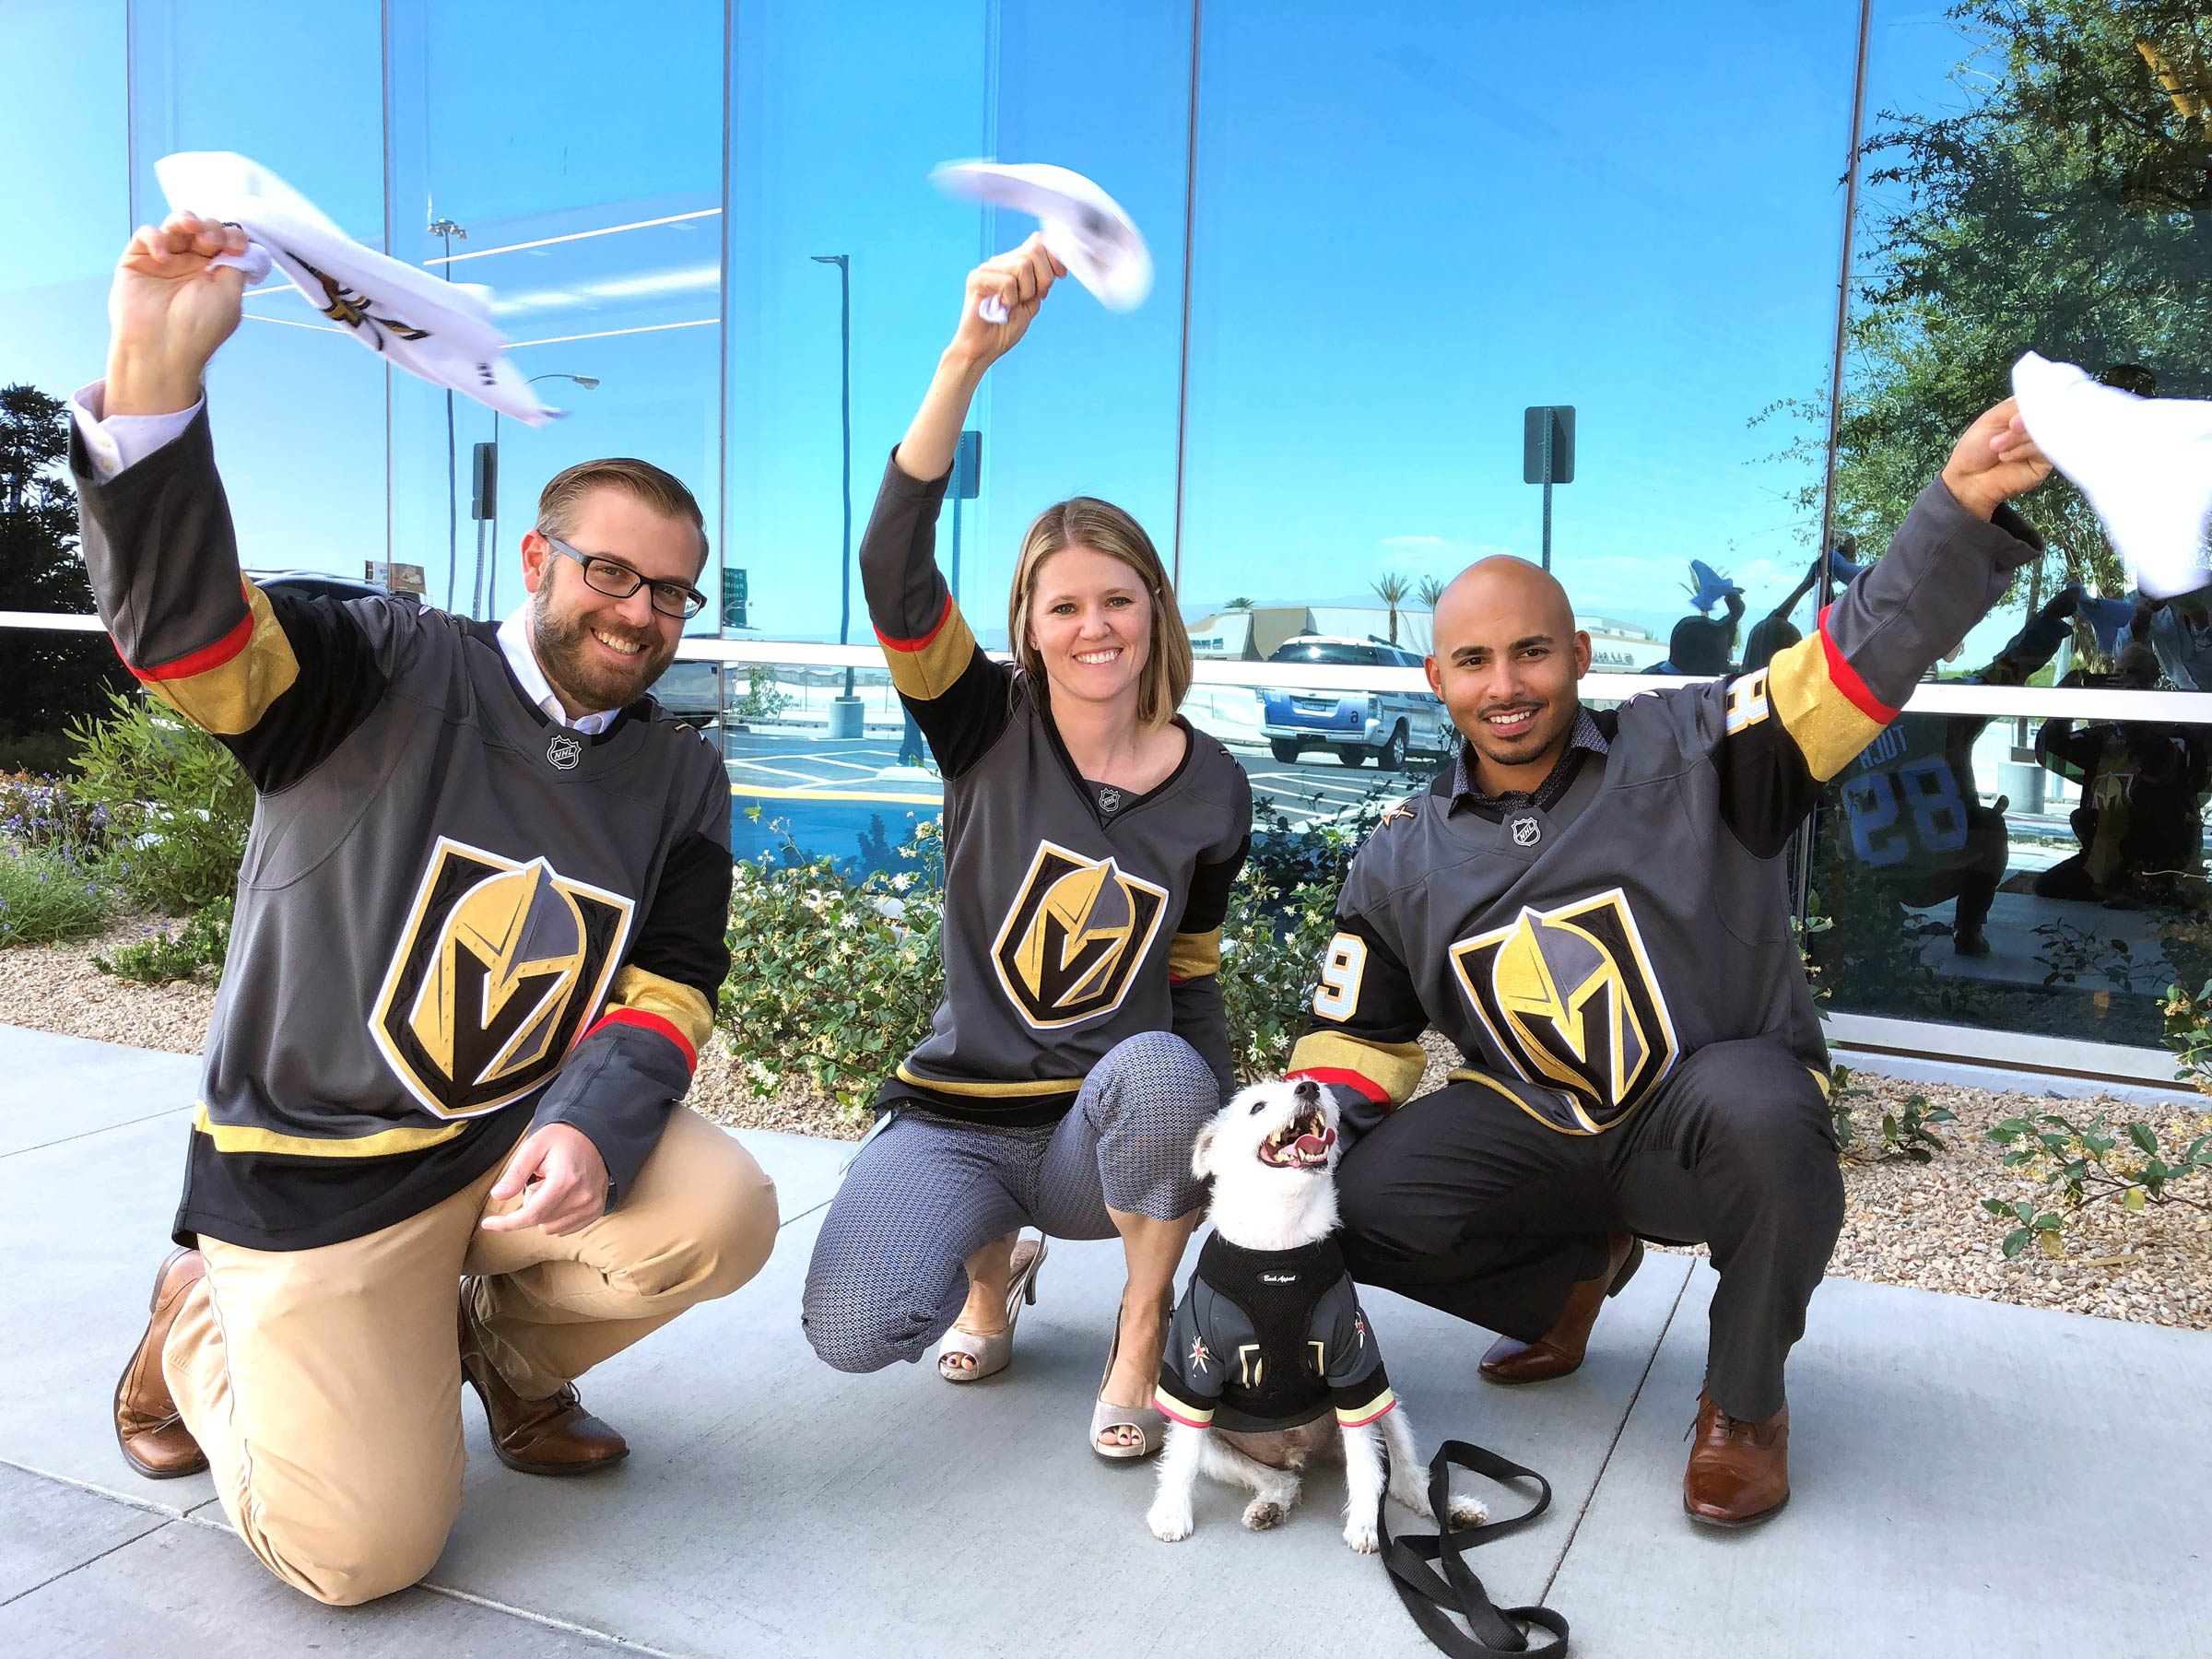 alt="Credit One Bank and Vegas Golden Knights Foundation members pose in Vegas Golden Knights jerseys"